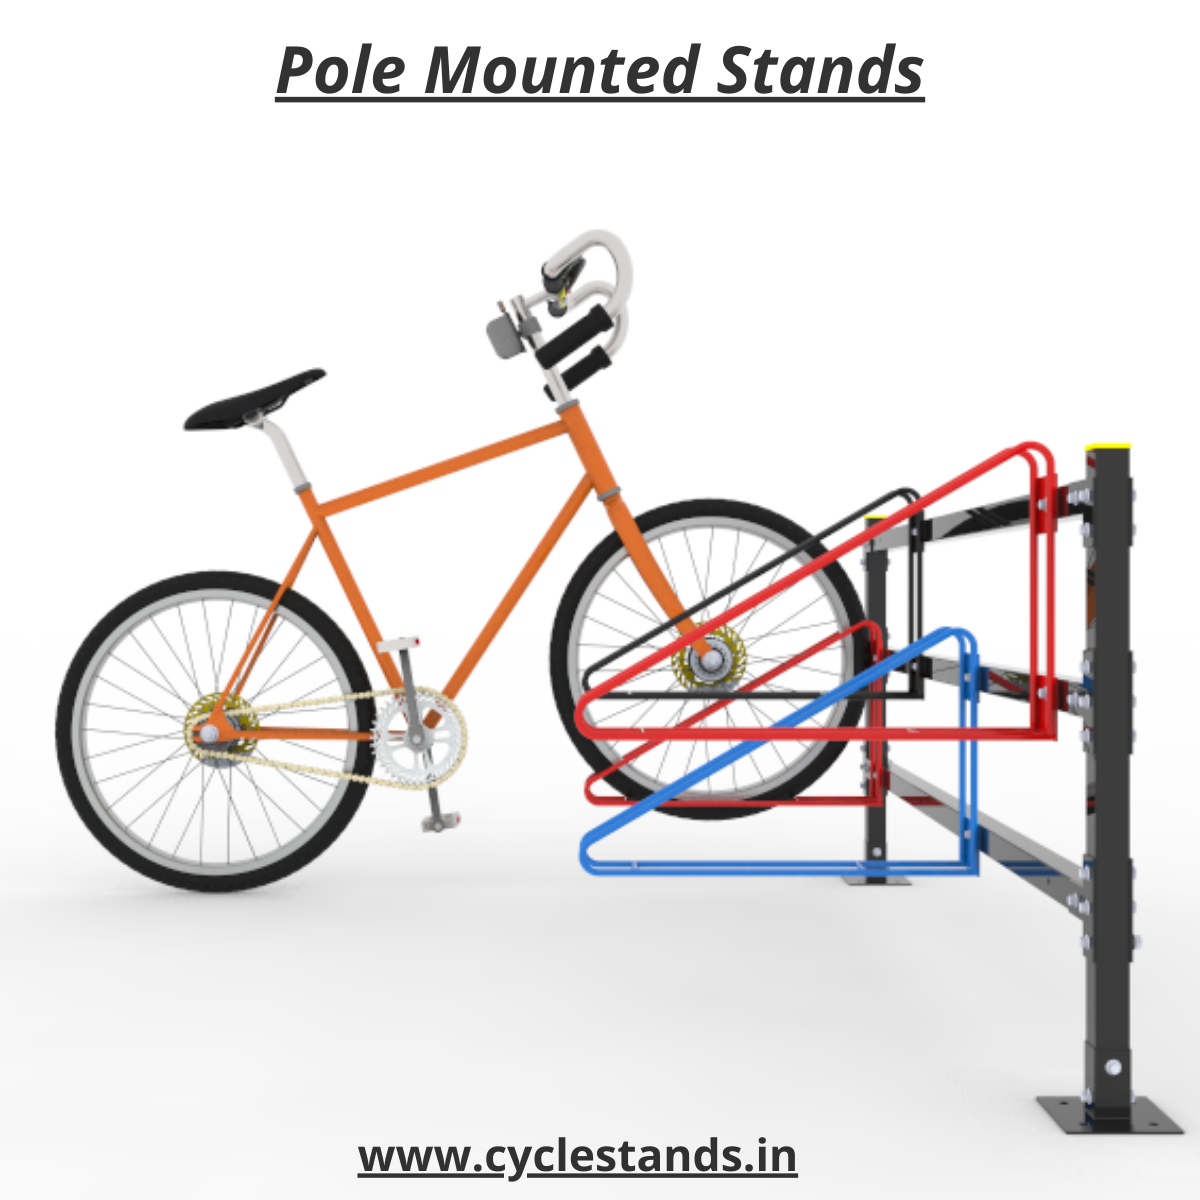 Pole Mounted Stands